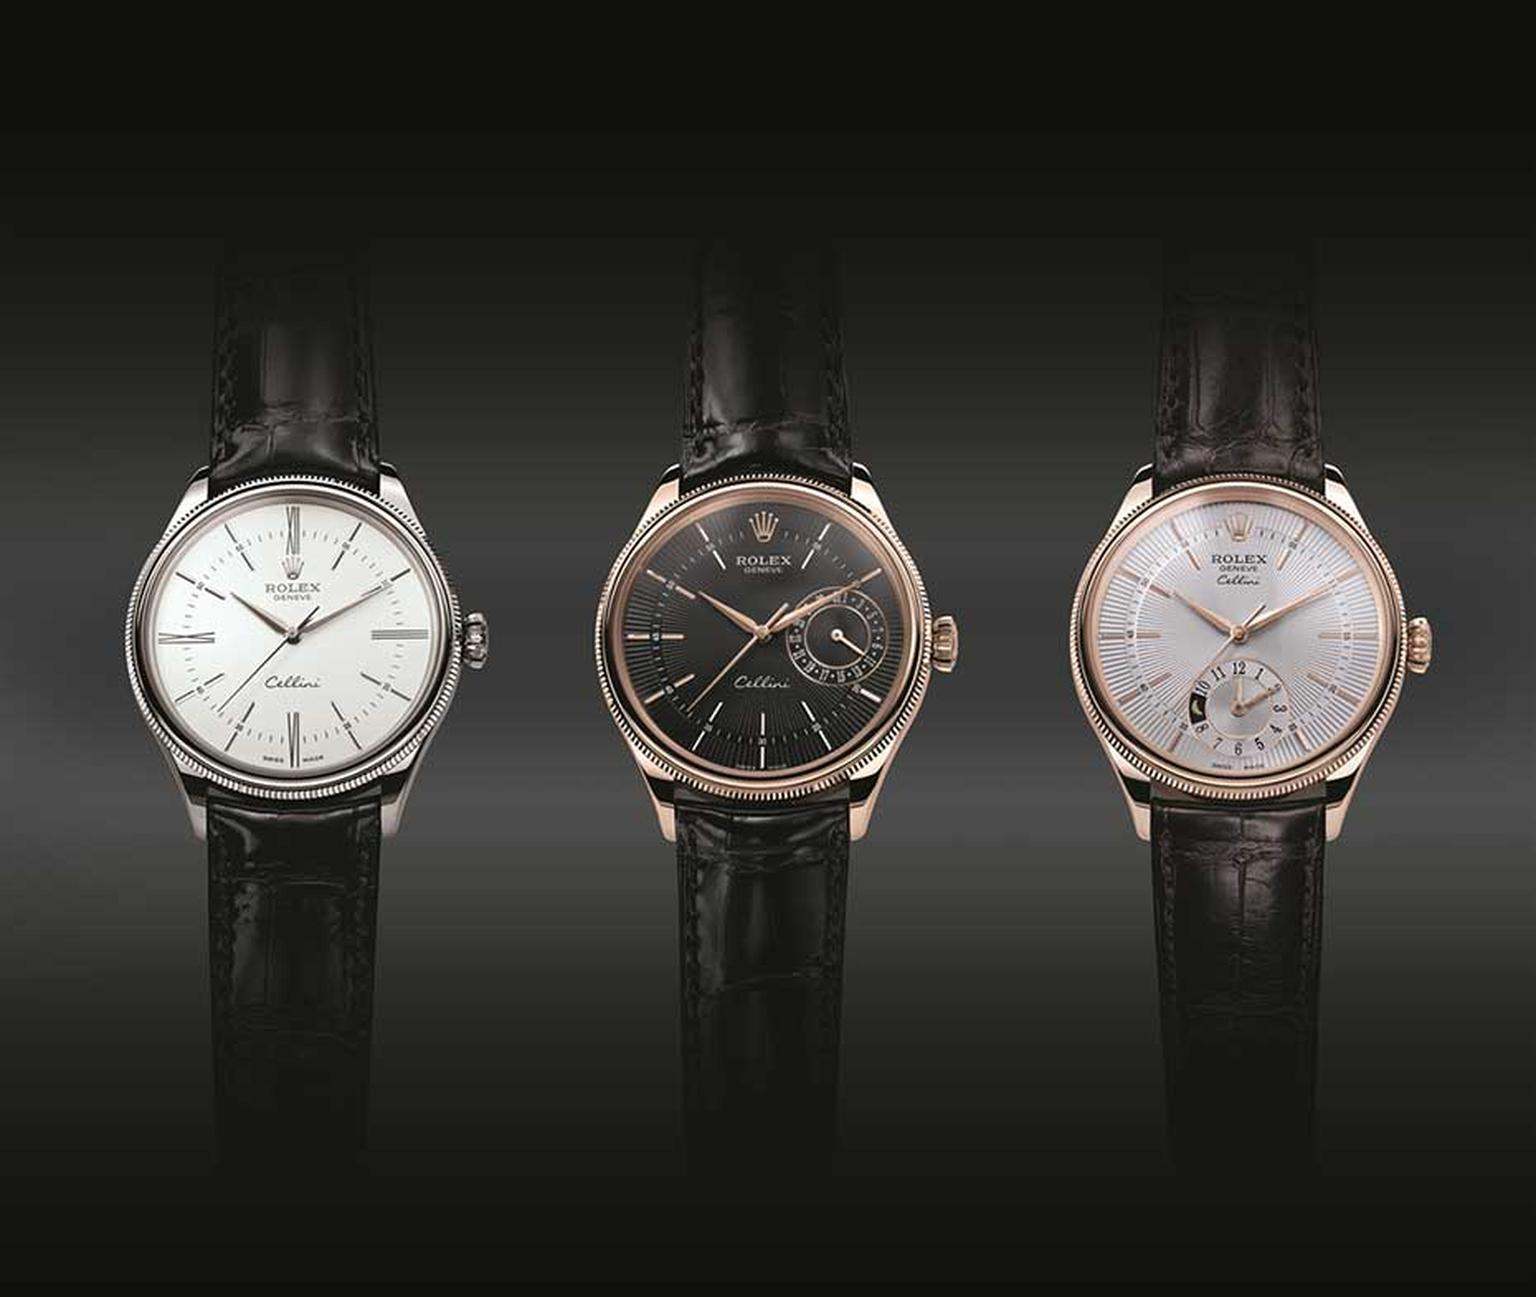 The trio of Rolex Cellini watches unveiled last week in Baselworld includes Cellini Time, Cellini Date and Cellini Dual Time models offered in white gold or Everose, a proprietary rose gold cast by Rolex in its own foundry